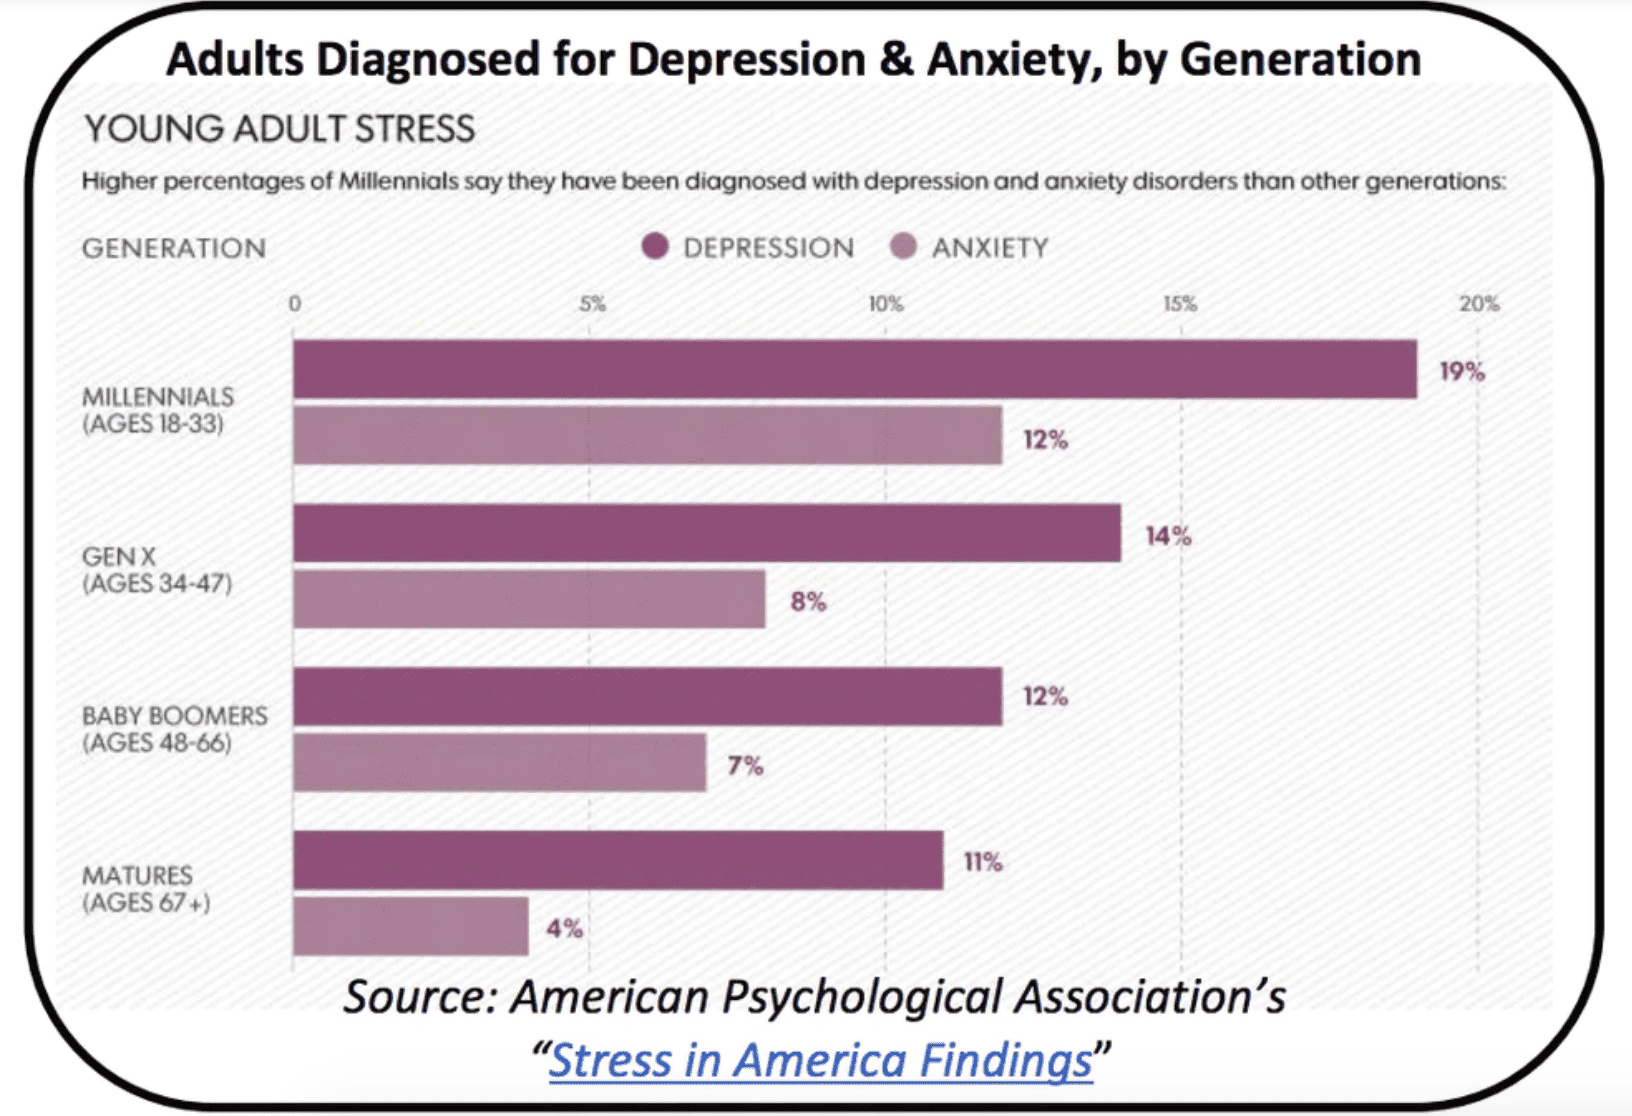 Increase in Anxiety and Depression in younger generations